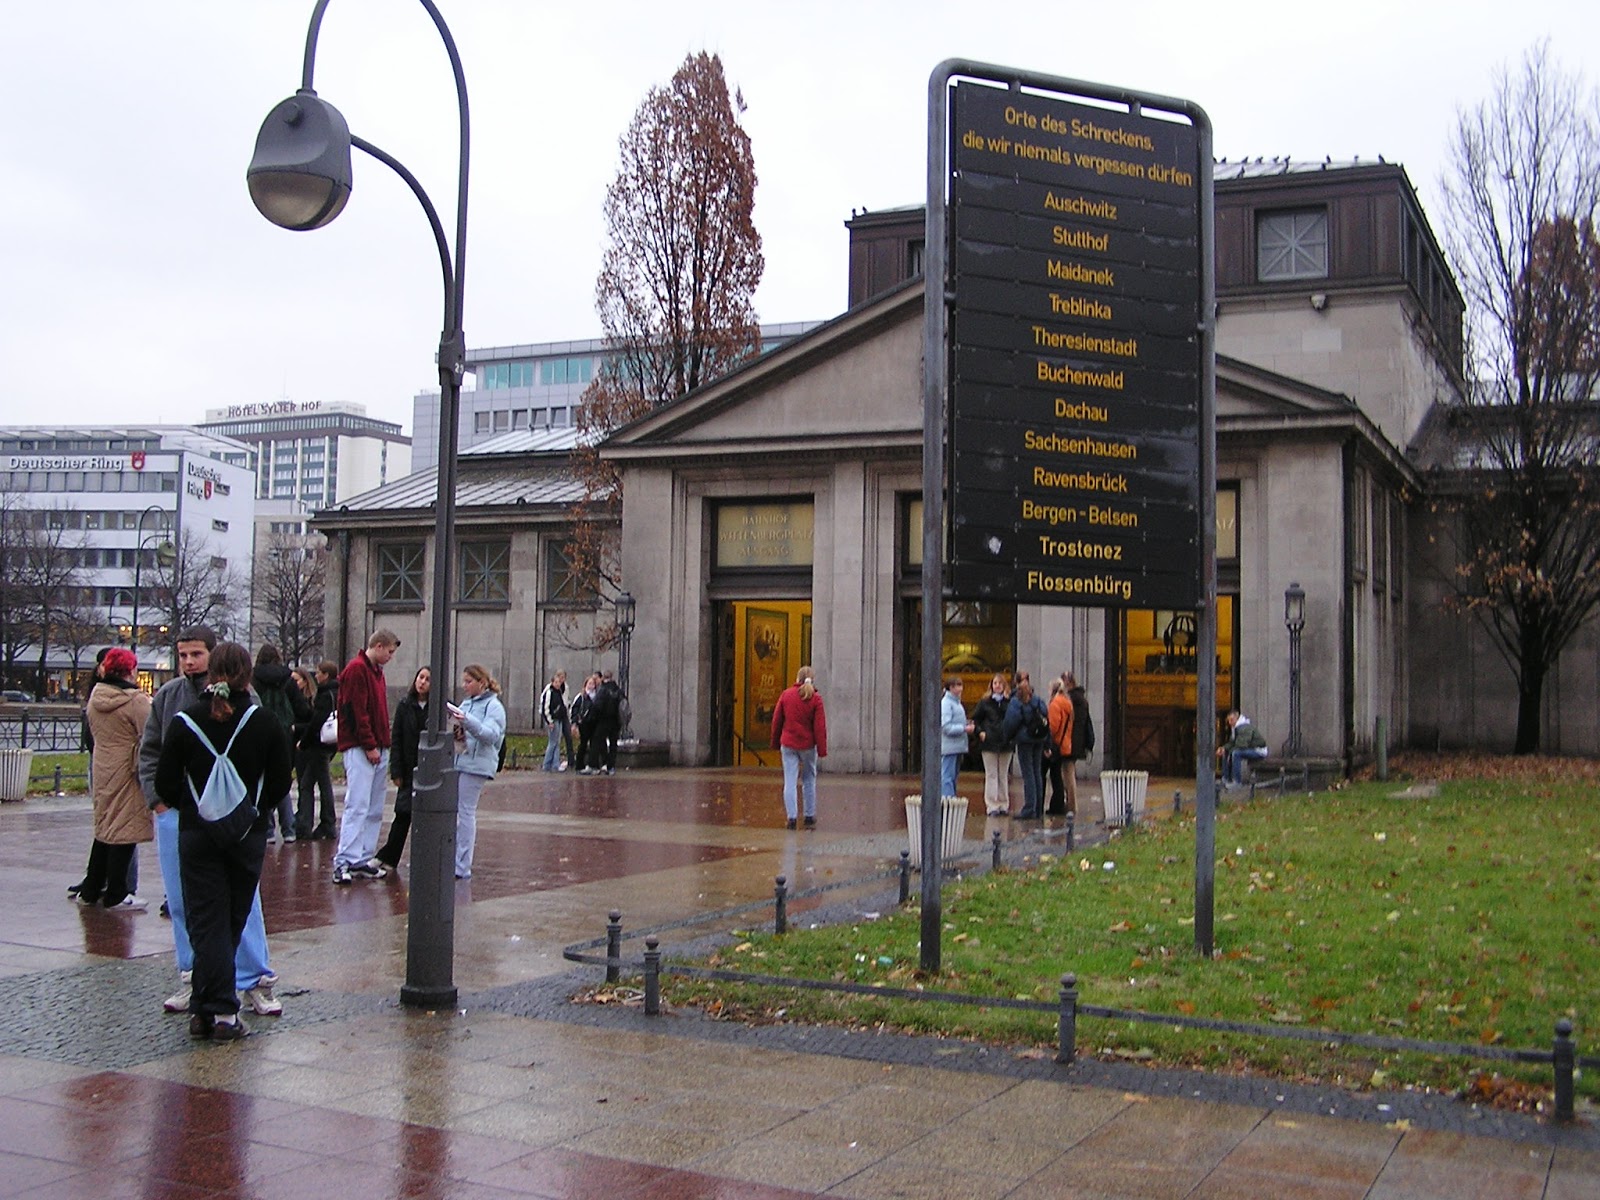 Samuel Gruber S Jewish Art Monuments Germany Holocaust Reminders At The U Bahn And S Bahn Stations